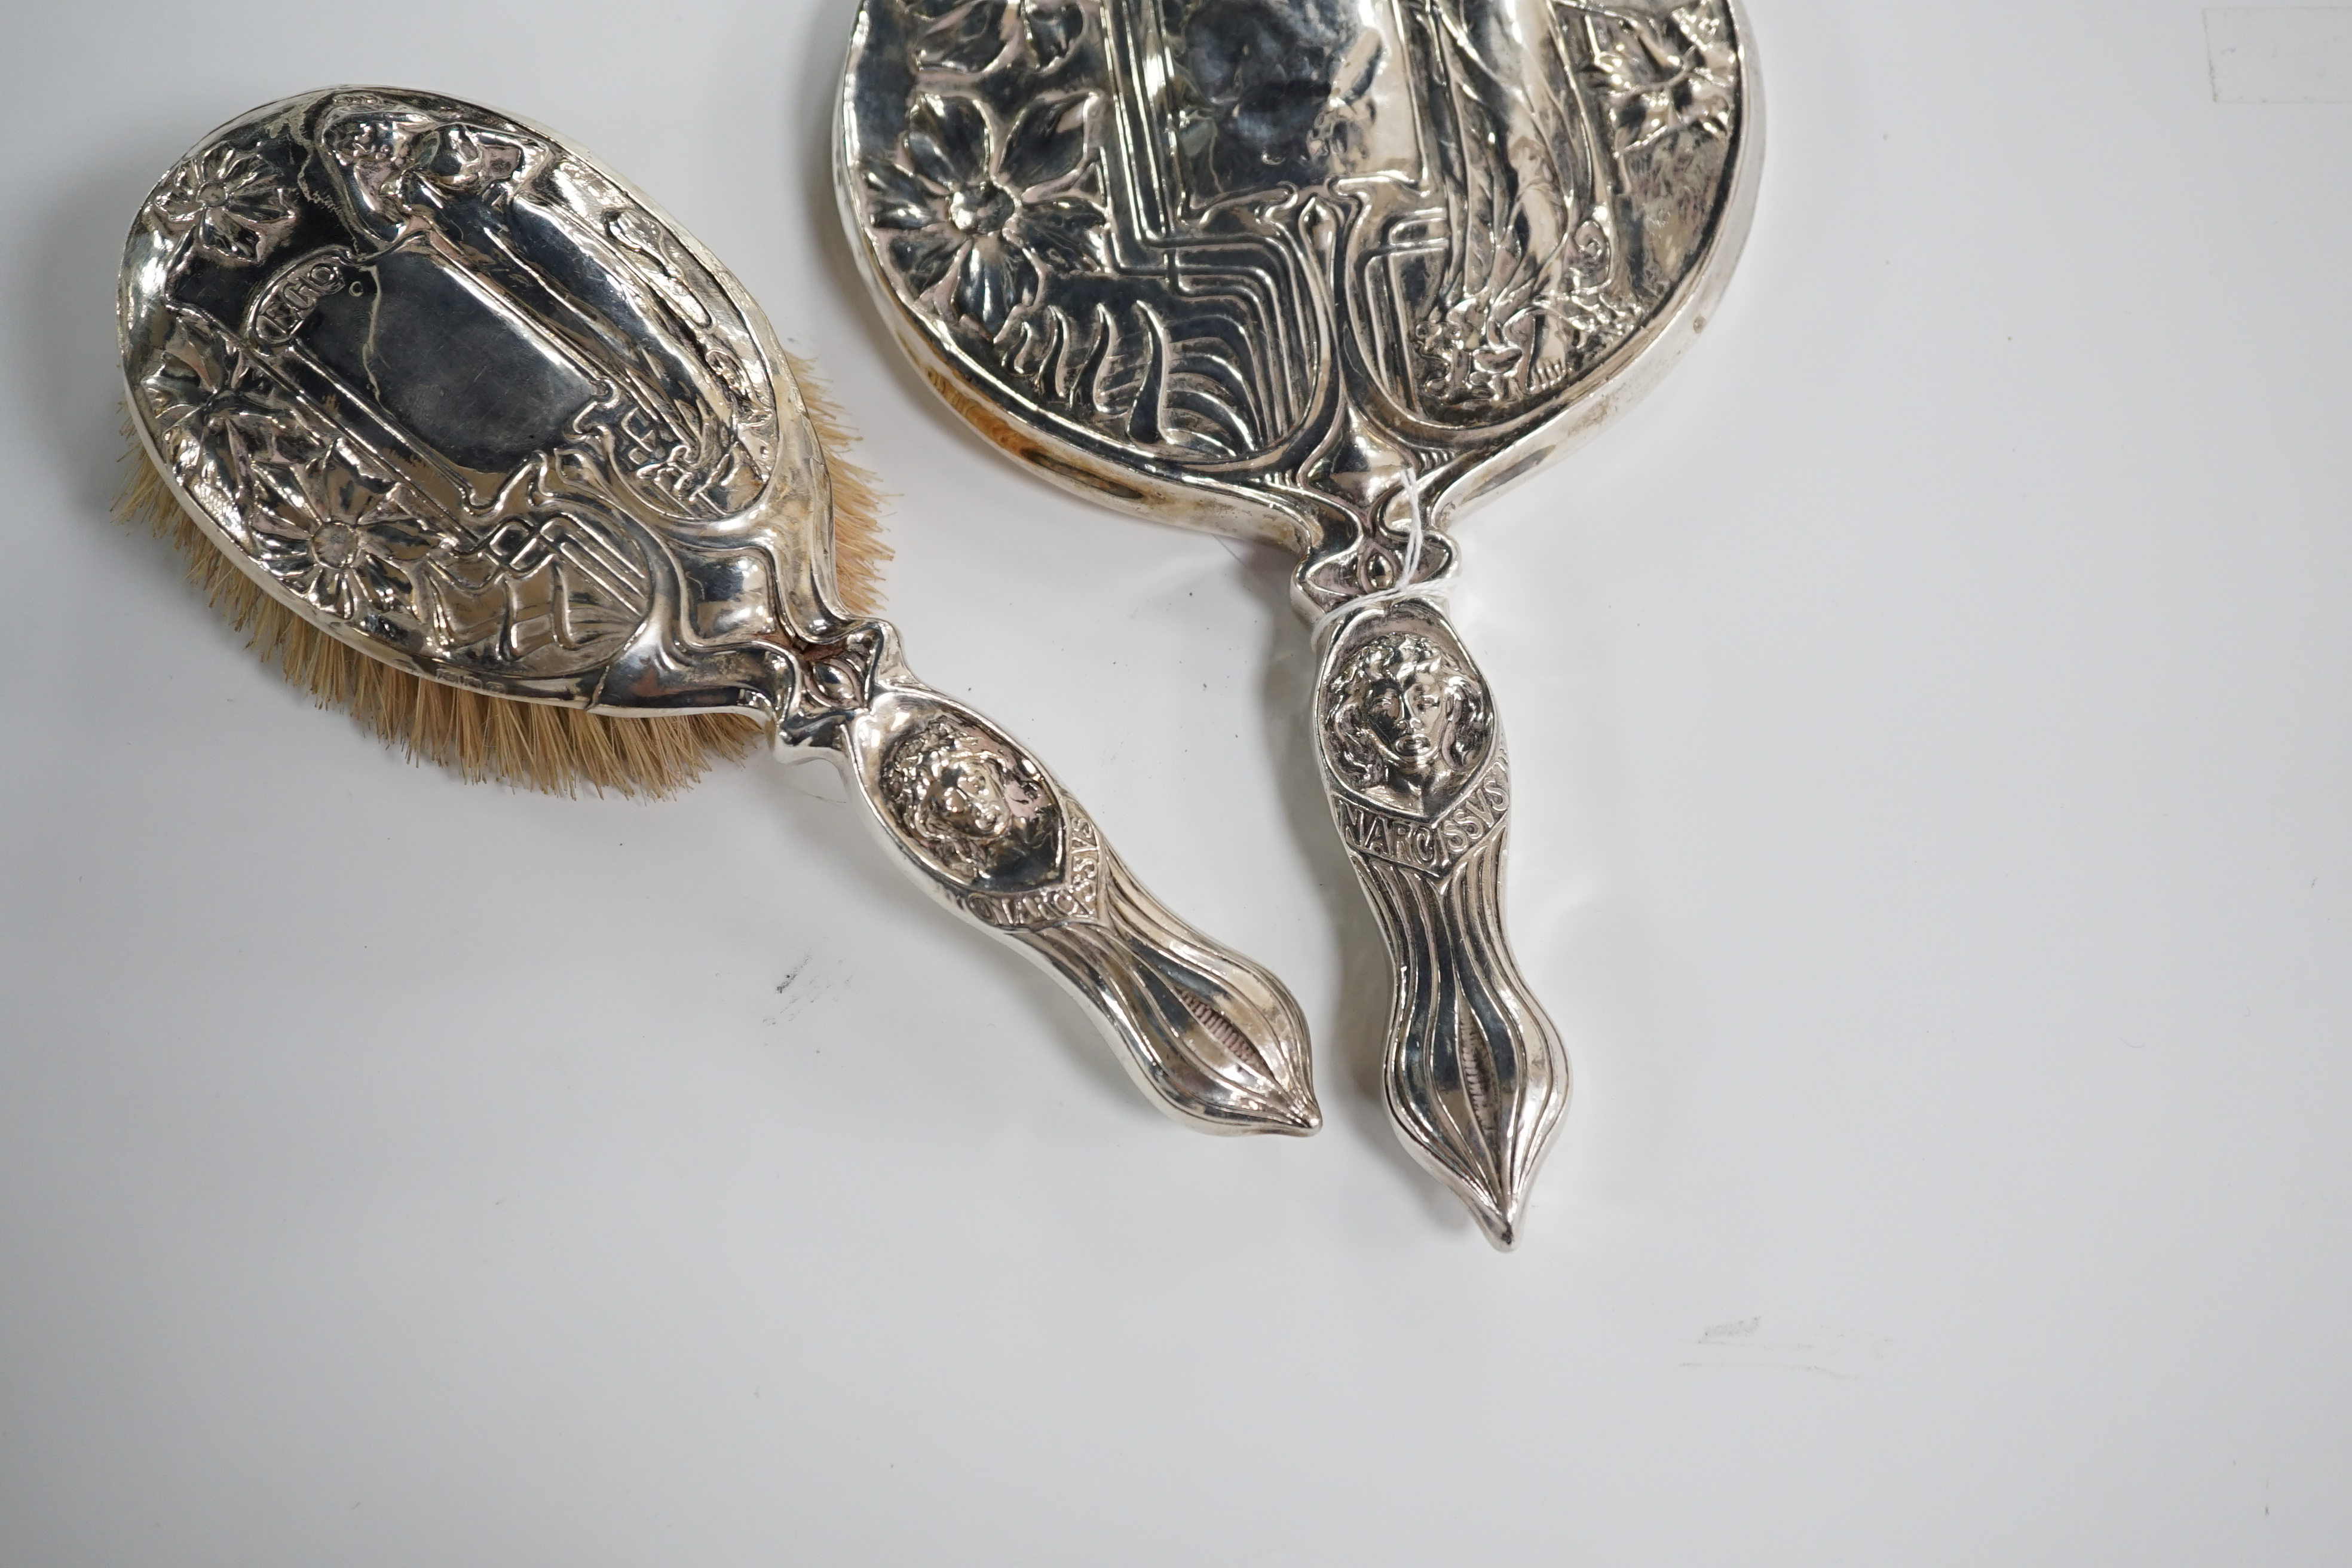 A late Victorian Art Nouveau silver mounted hand mirror, marks rubbed, 27.8cm. and a later similar hair brush, London 1902. Condition - poor